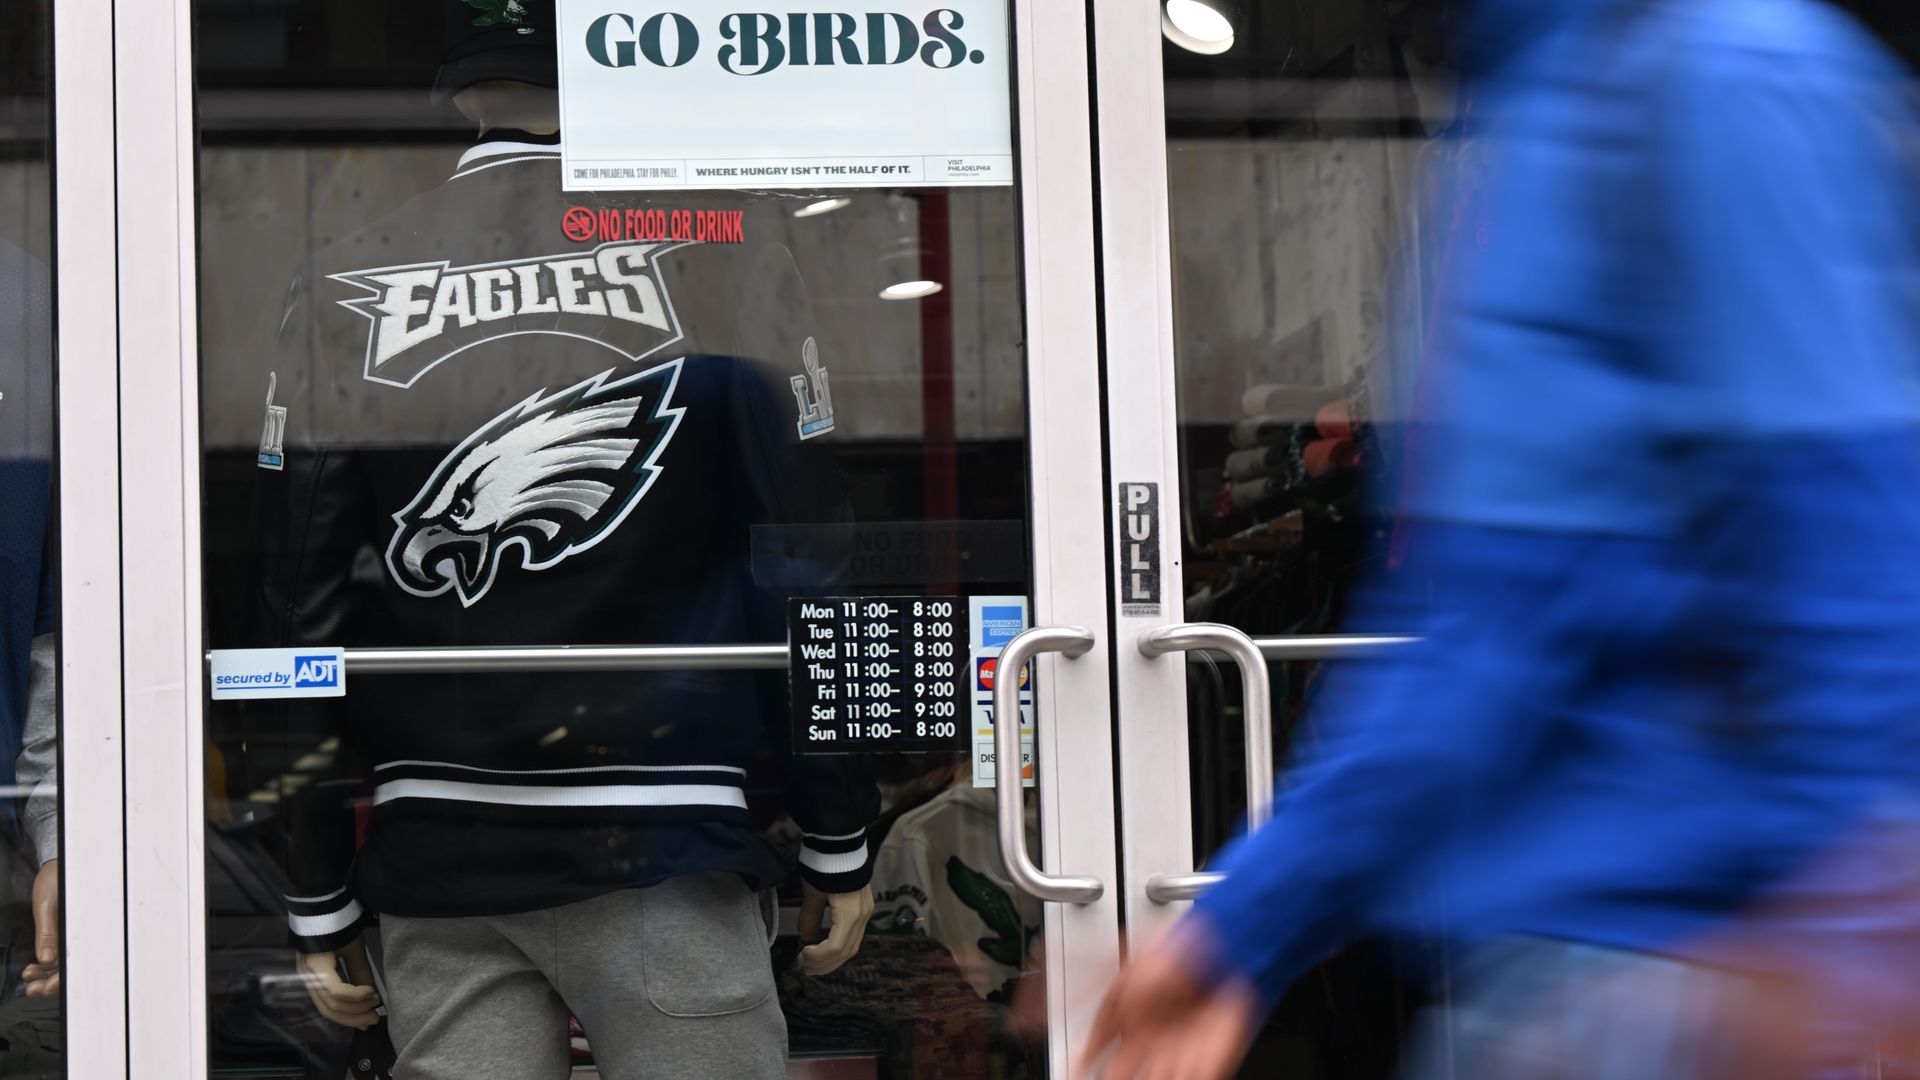 An Eagles fan wears his apparel in the lead up to the Super Bowl on Sunday.